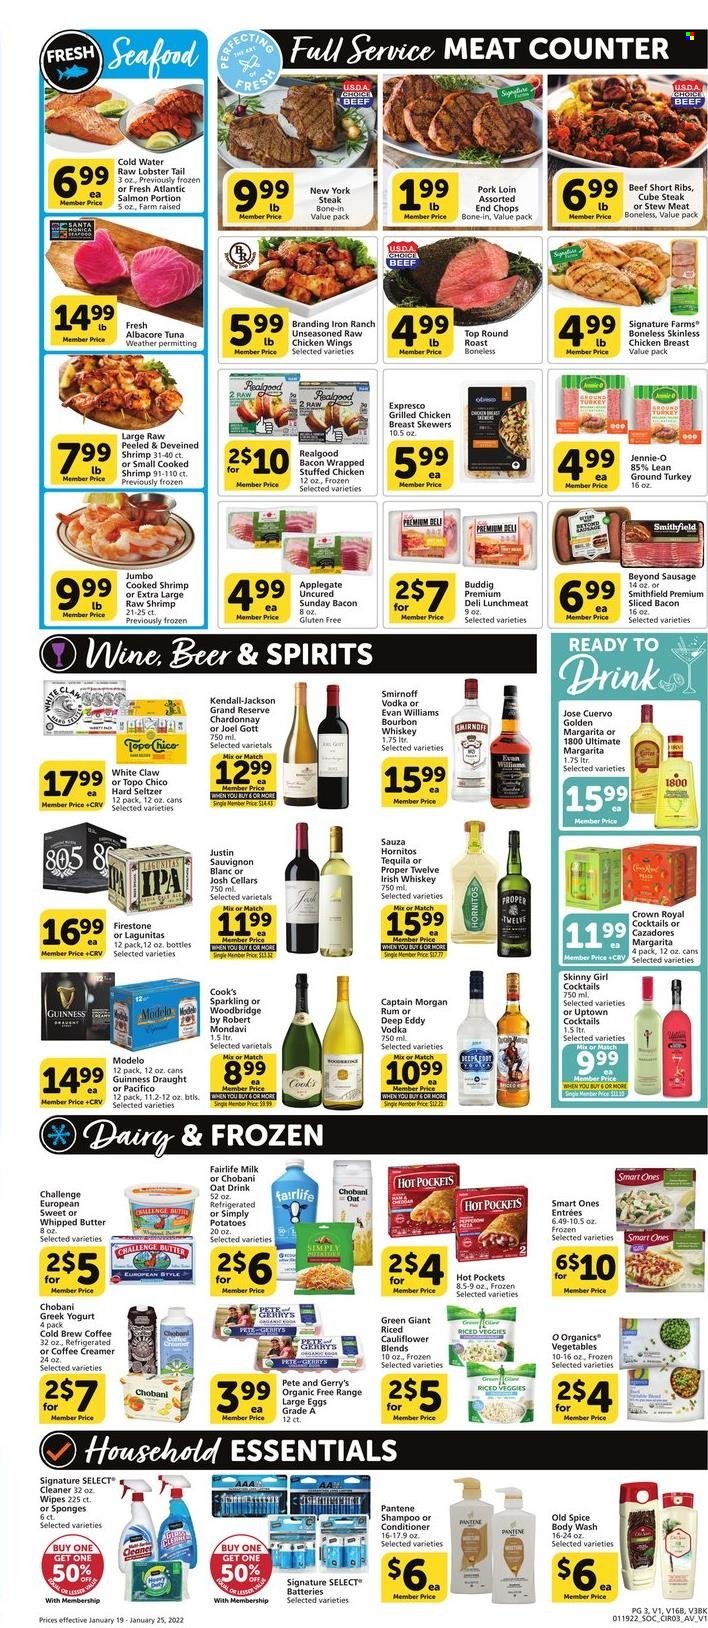 thumbnail - Vons Flyer - 01/19/2022 - 01/25/2022 - Sales products - potatoes, ground turkey, chicken breasts, chicken wings, beef ribs, stew meat, steak, pork loin, pork meat, lobster, salmon, tuna, lobster tail, shrimps, hot pocket, stuffed chicken, bacon, Cook's, sausage, lunch meat, greek yoghurt, yoghurt, Chobani, milk, large eggs, whipped butter, creamer, Santa, spice, white wine, Chardonnay, Sauvignon Blanc, Woodbridge by Robert Mondavi, Woodbridge, Captain Morgan, rum, Smirnoff, tequila, vodka, whiskey, irish whiskey, White Claw, Hard Seltzer, bourbon whiskey, whisky, beer, Guinness, IPA, Modelo, wipes, cleaner, body wash, shampoo, Old Spice, conditioner, Pantene, sponge, pen, battery. Page 3.